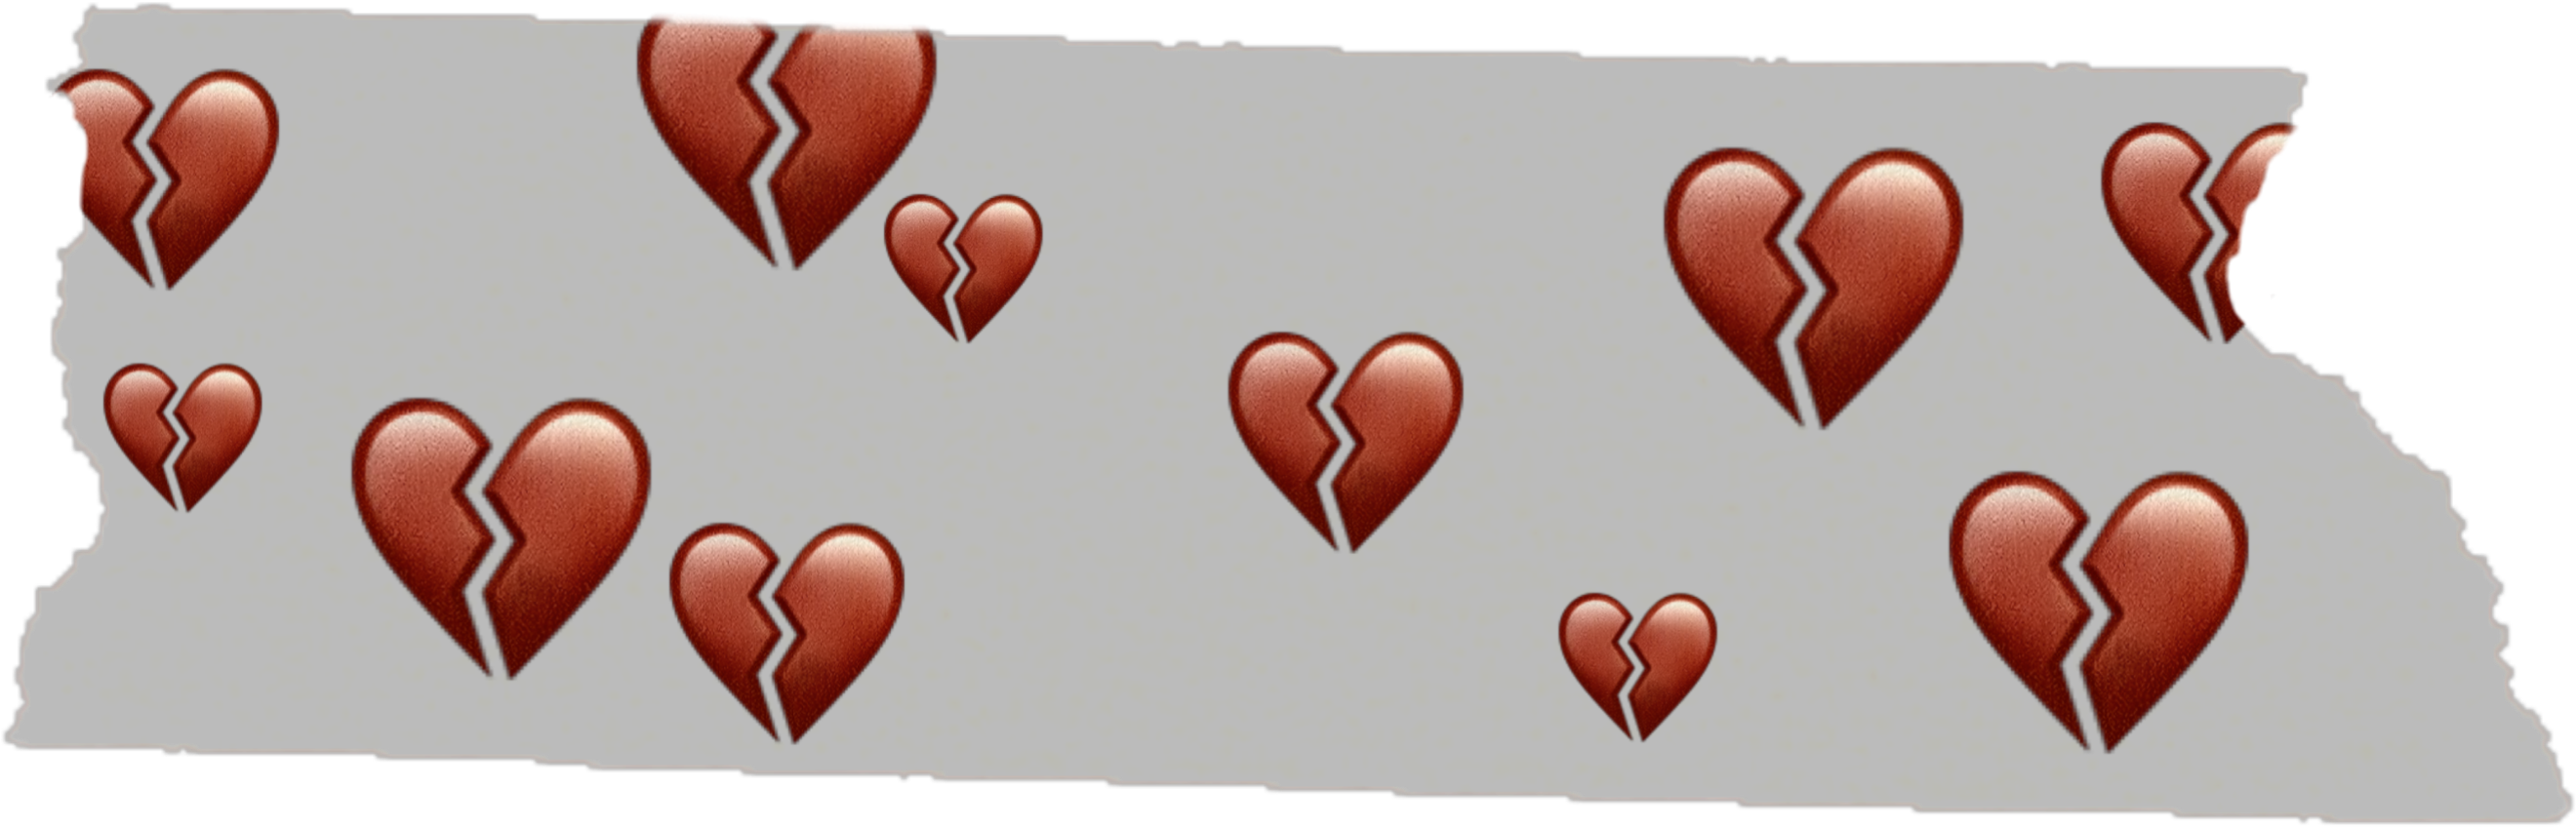 A Group Of Red Hearts